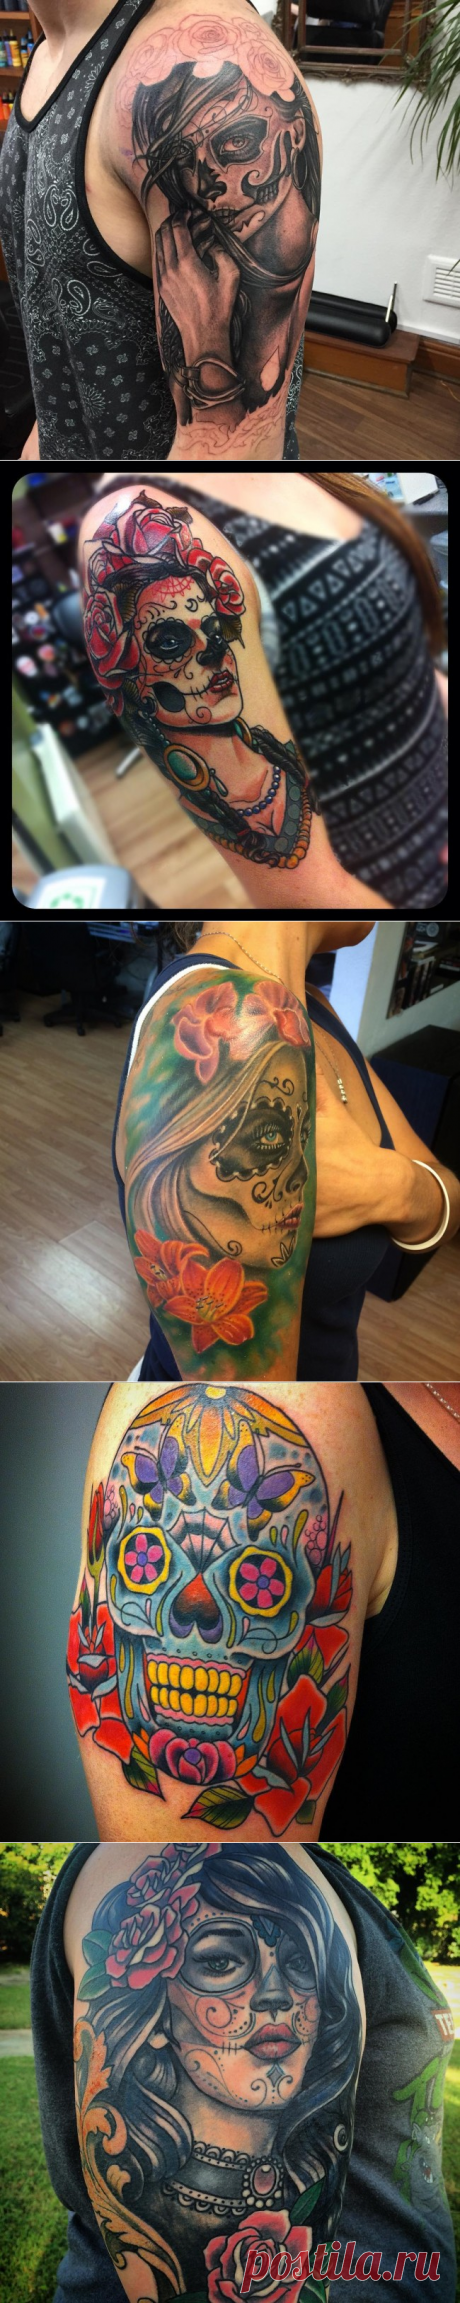 40+ Eye-Catching Day of the Dead Tattoos - Faces, Skulls, Girls...